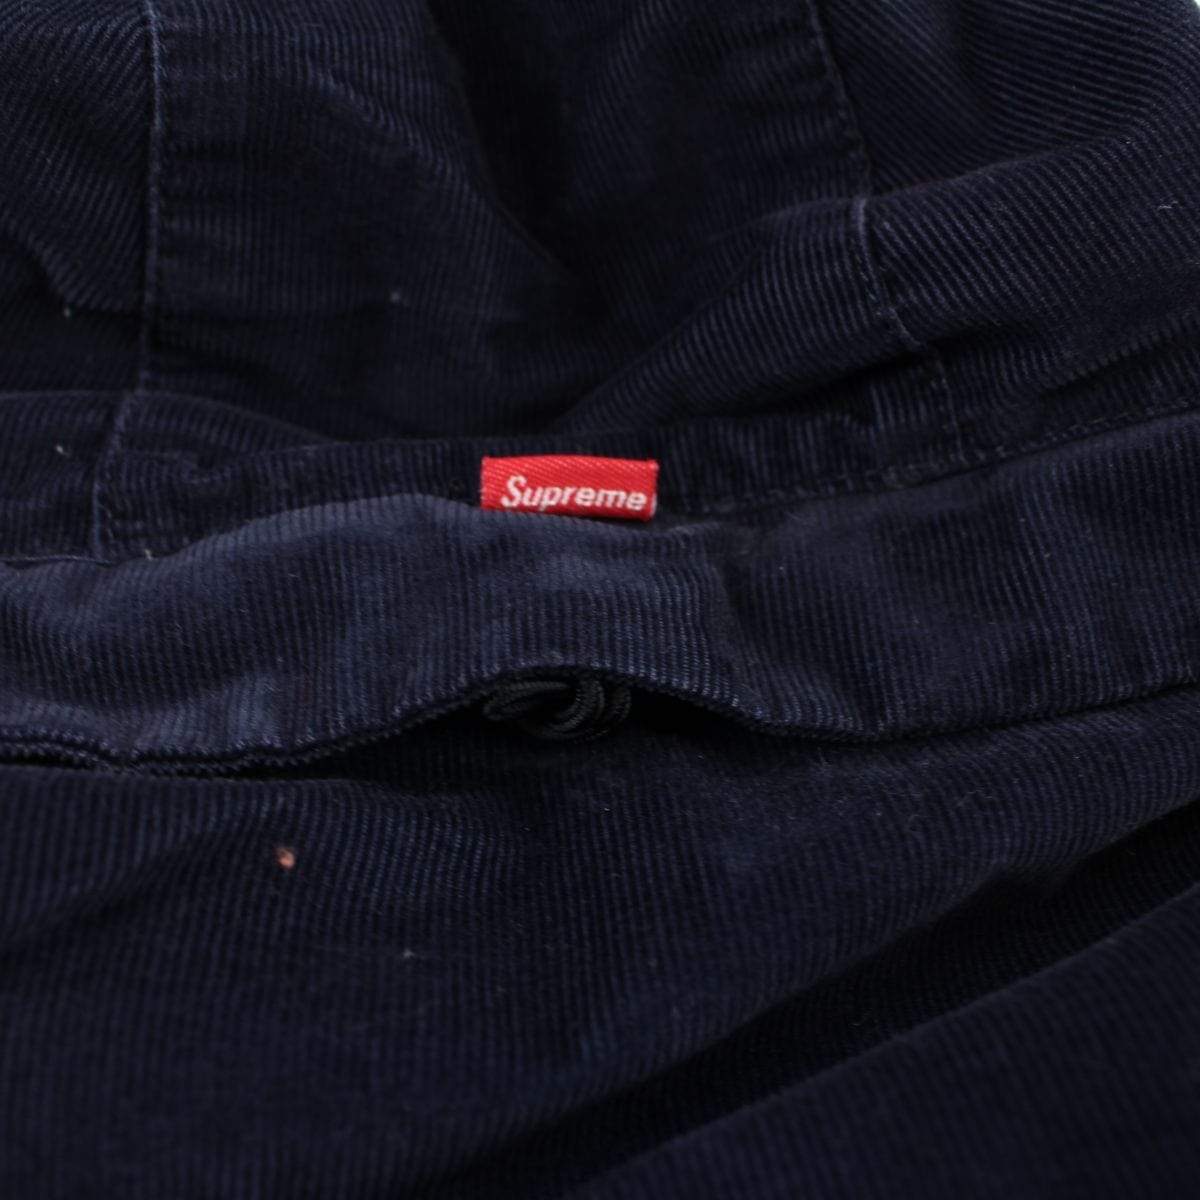 supreme x The North Face navy corduroy jacket 2012 - SaruGeneral